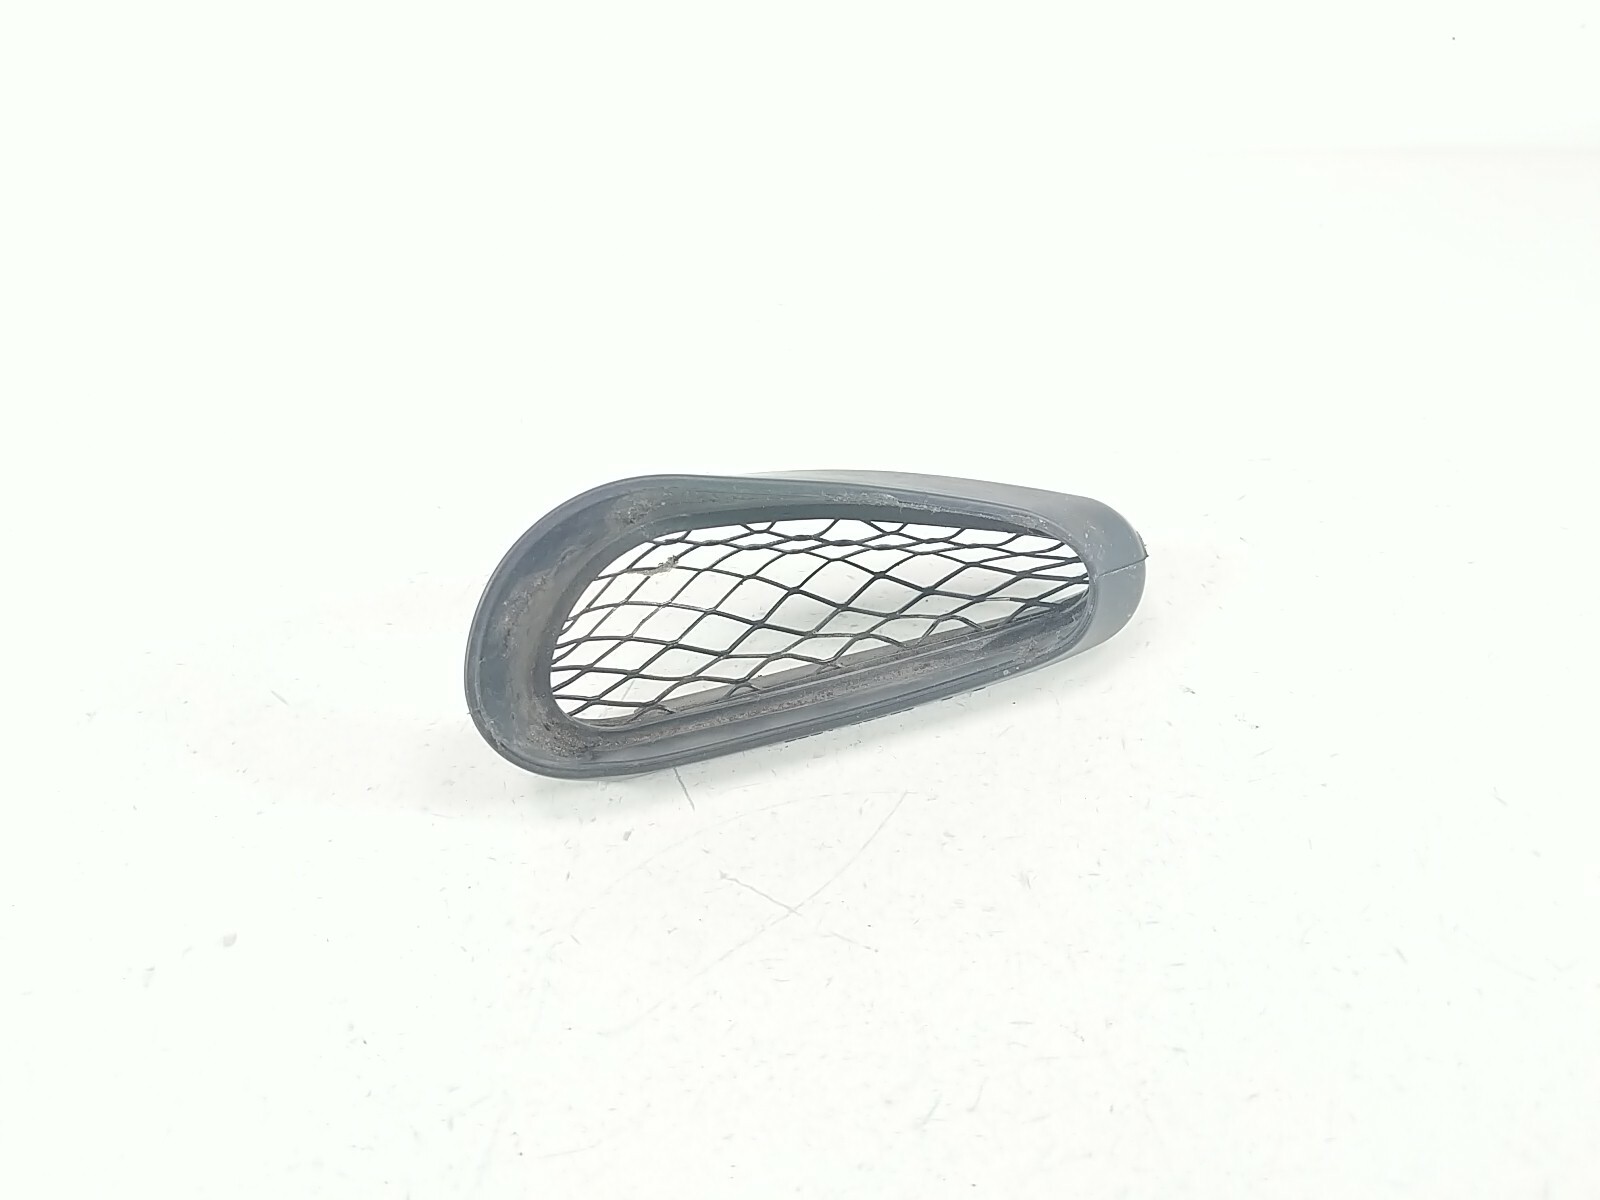 02 Kawasaki Ninja ZZR1200 Right Air Duct Grill Duct Cover 92093-1562